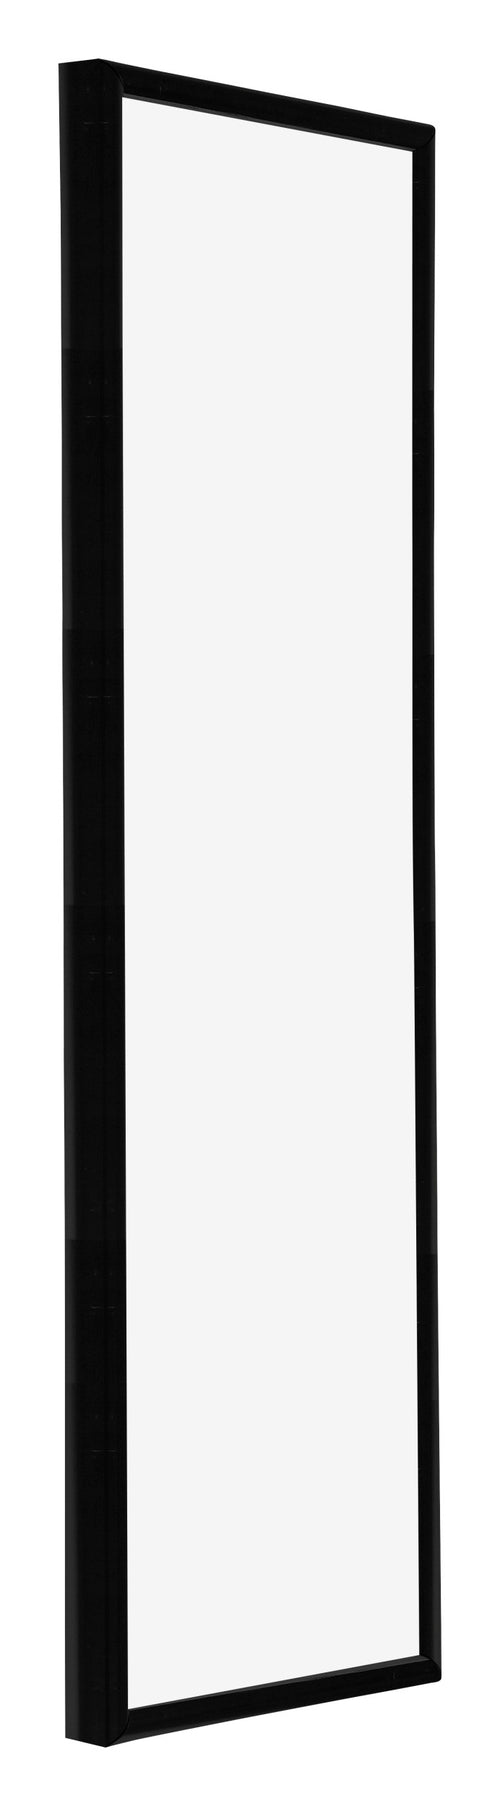 Annecy Plastic Photo Frame 20x60cm Black High Gloss Front Oblique | Yourdecoration.co.uk